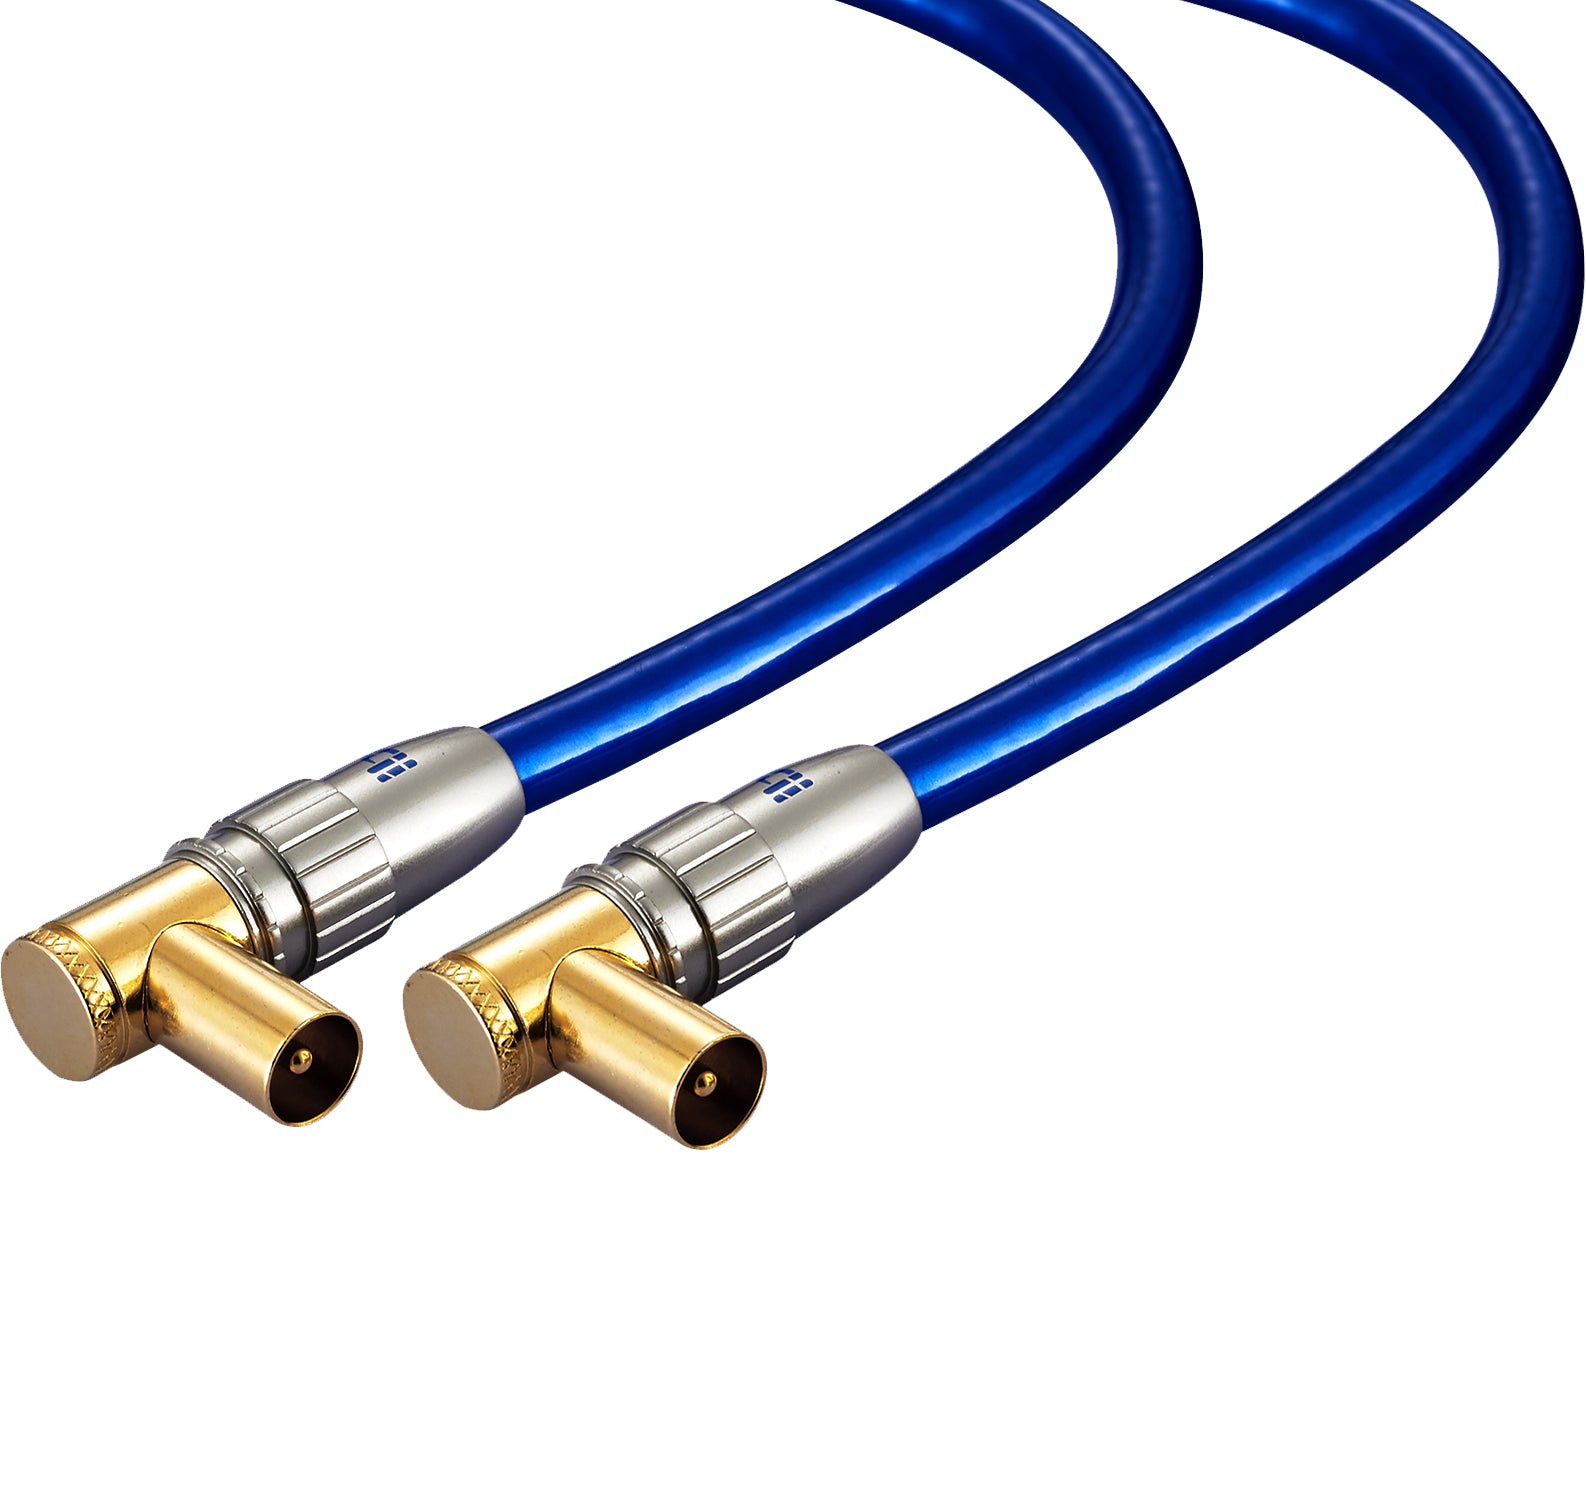 IBRA 5m HDTV Antenna Cable | TV Aerial Cable with 90 Degree Right Angled Connectors | Premium Freeview Coaxial Cable | 90° Angled Connectors: Coax Male to Male | For UHV/UHF/RF DVB-T1/T2